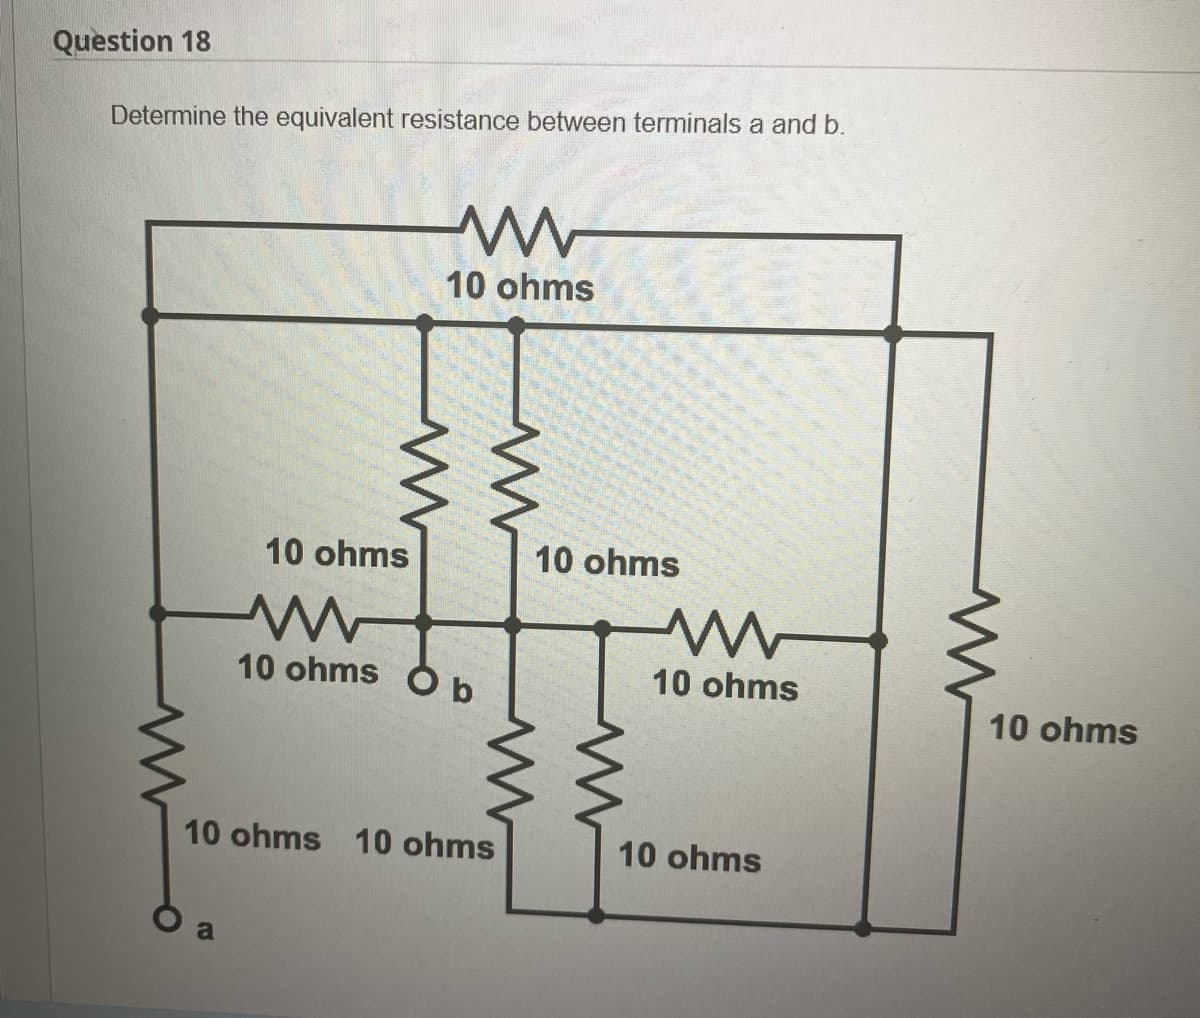 Question 18
Determine the equivalent resistance between terminals a and b.
ww
10 ohms
10 ohms
10 ohms O b
10 ohms 10 ohms
a
10 ohms
ww
10 ohms
10 ohms
10 ohms